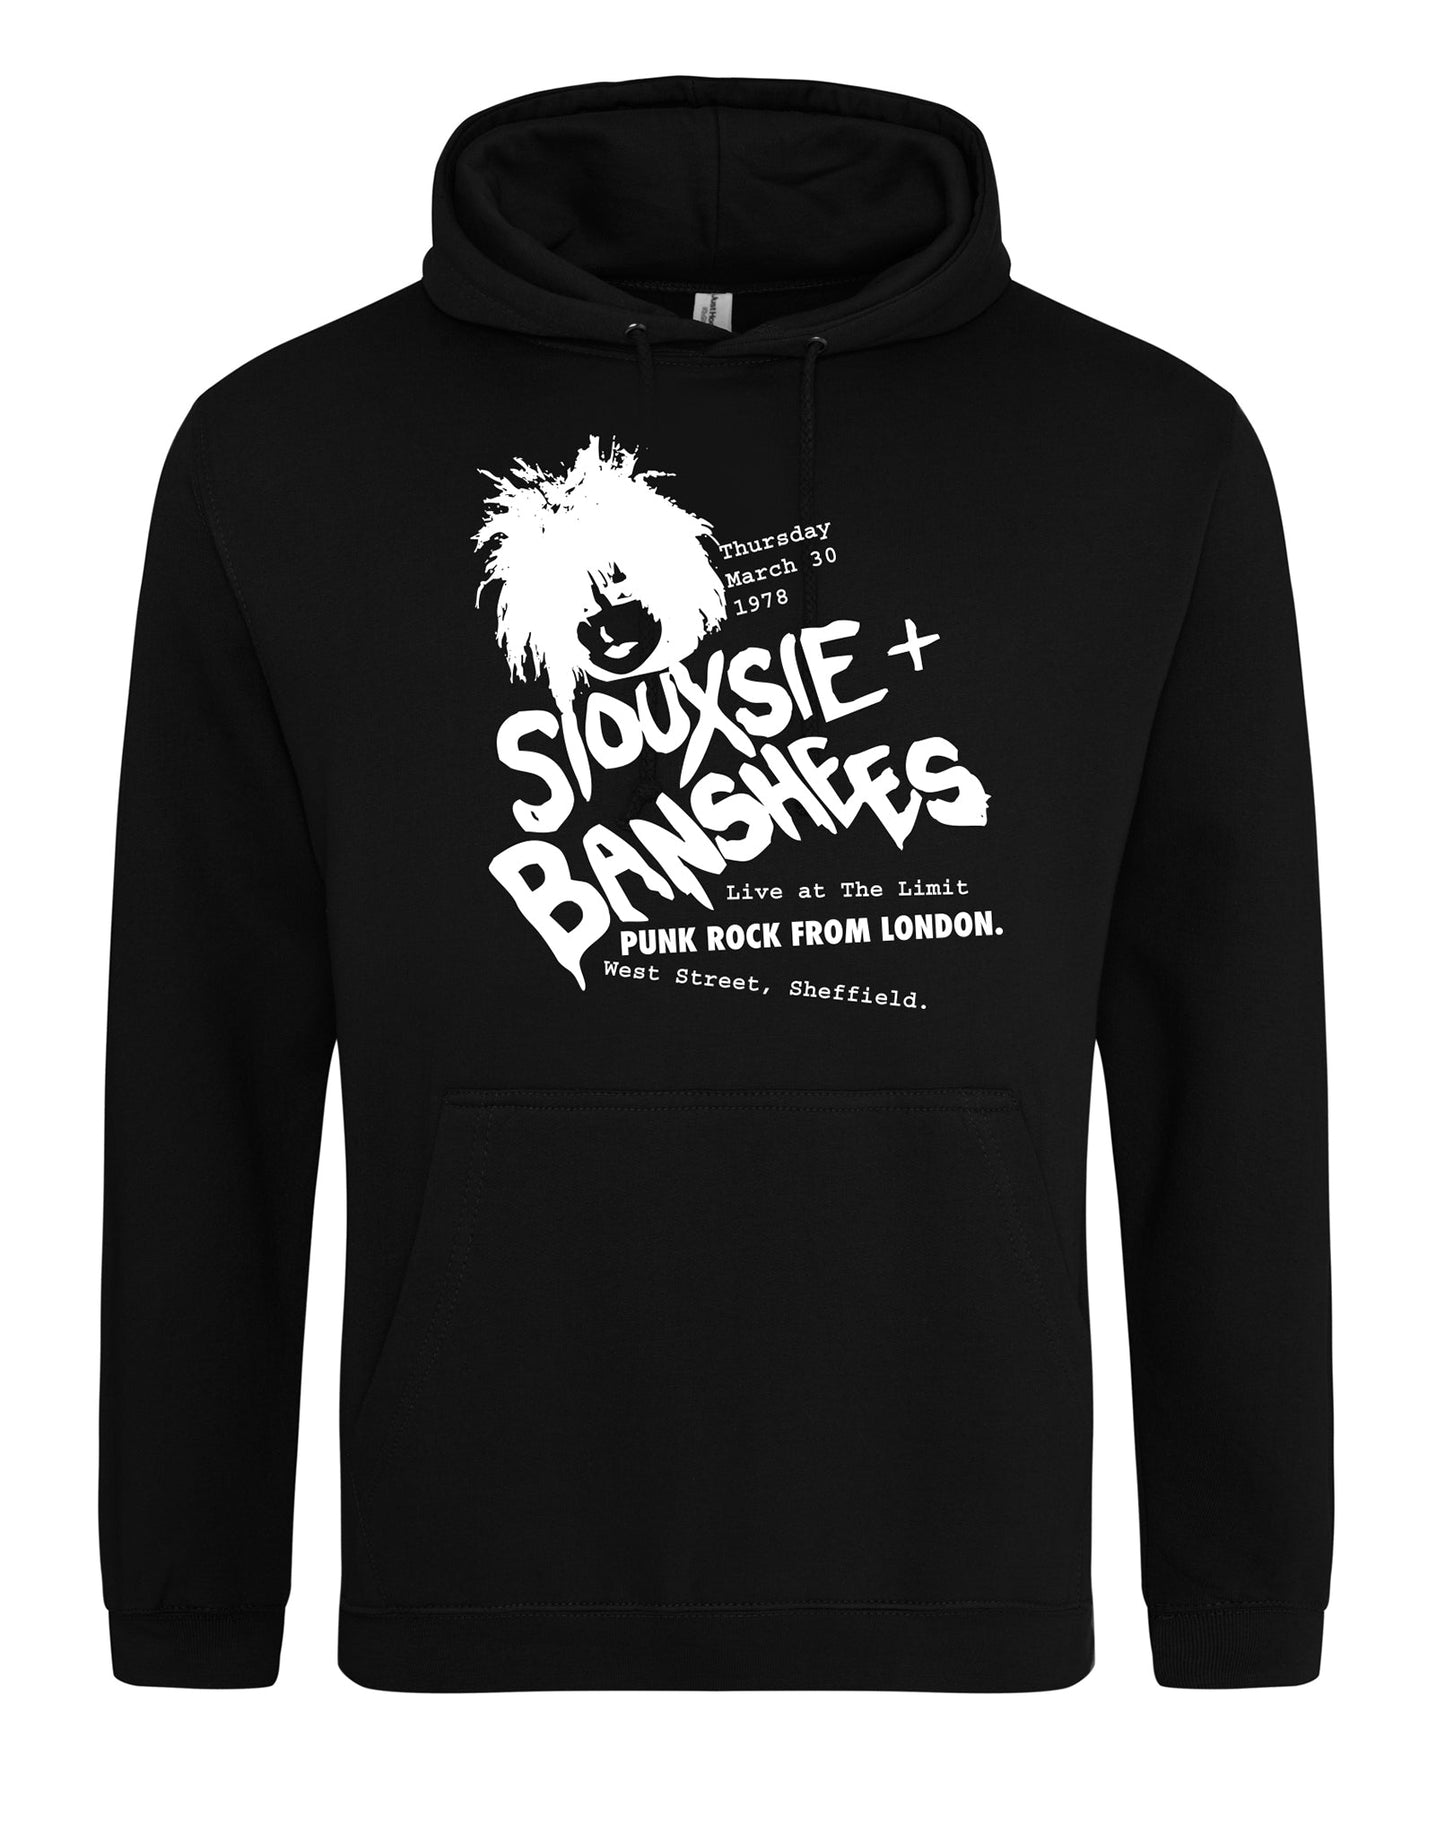 Siouxsie at the Limit - unisex fit hoodie - various colours - Dirty Stop Outs